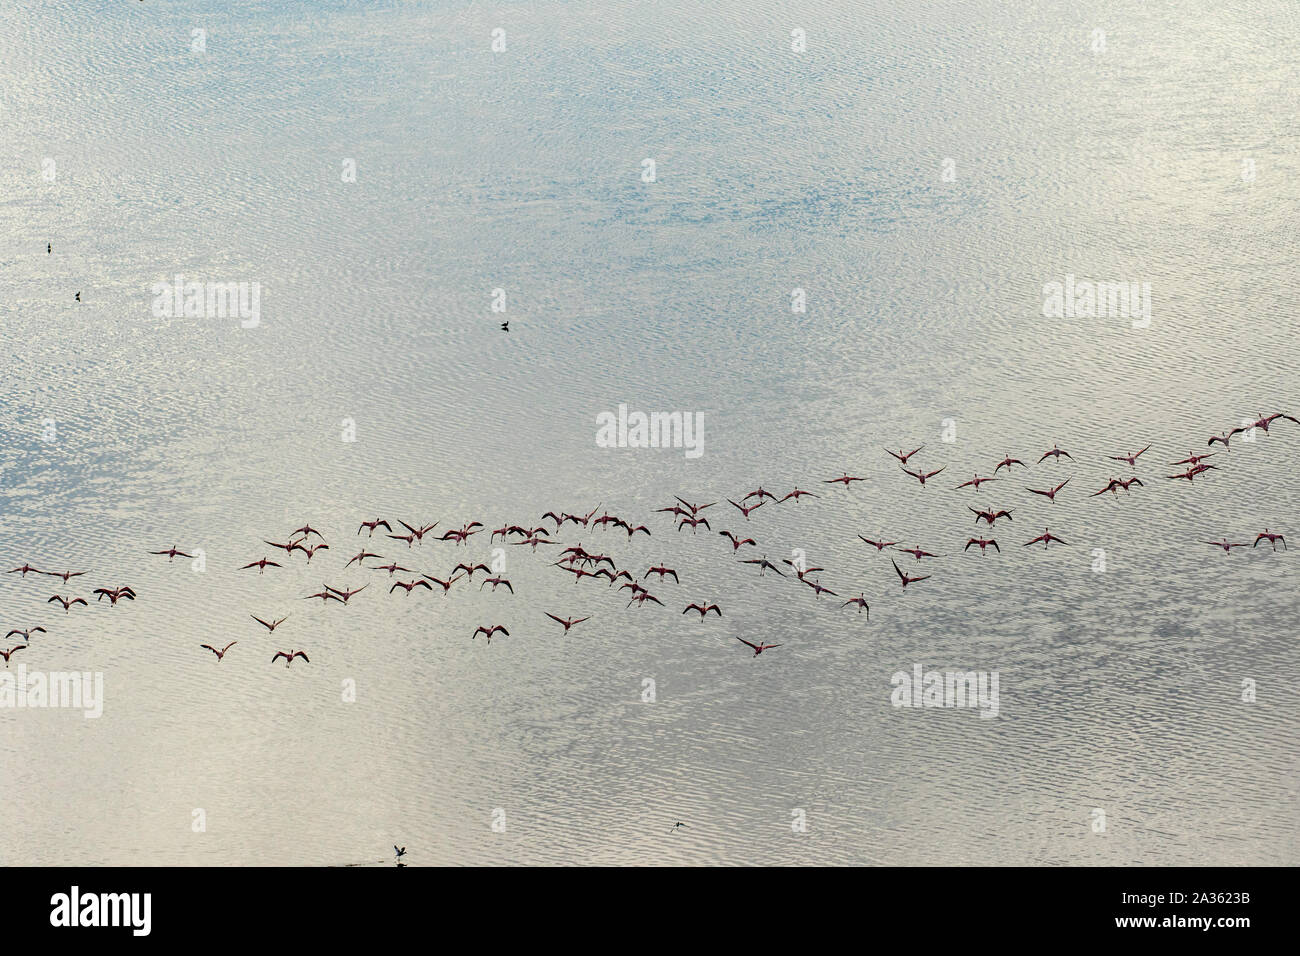 Africa, Tanzania, Aerial view of flock of  Greater and Lesser Flamingos flying above salt waters of Lake Natron Stock Photo